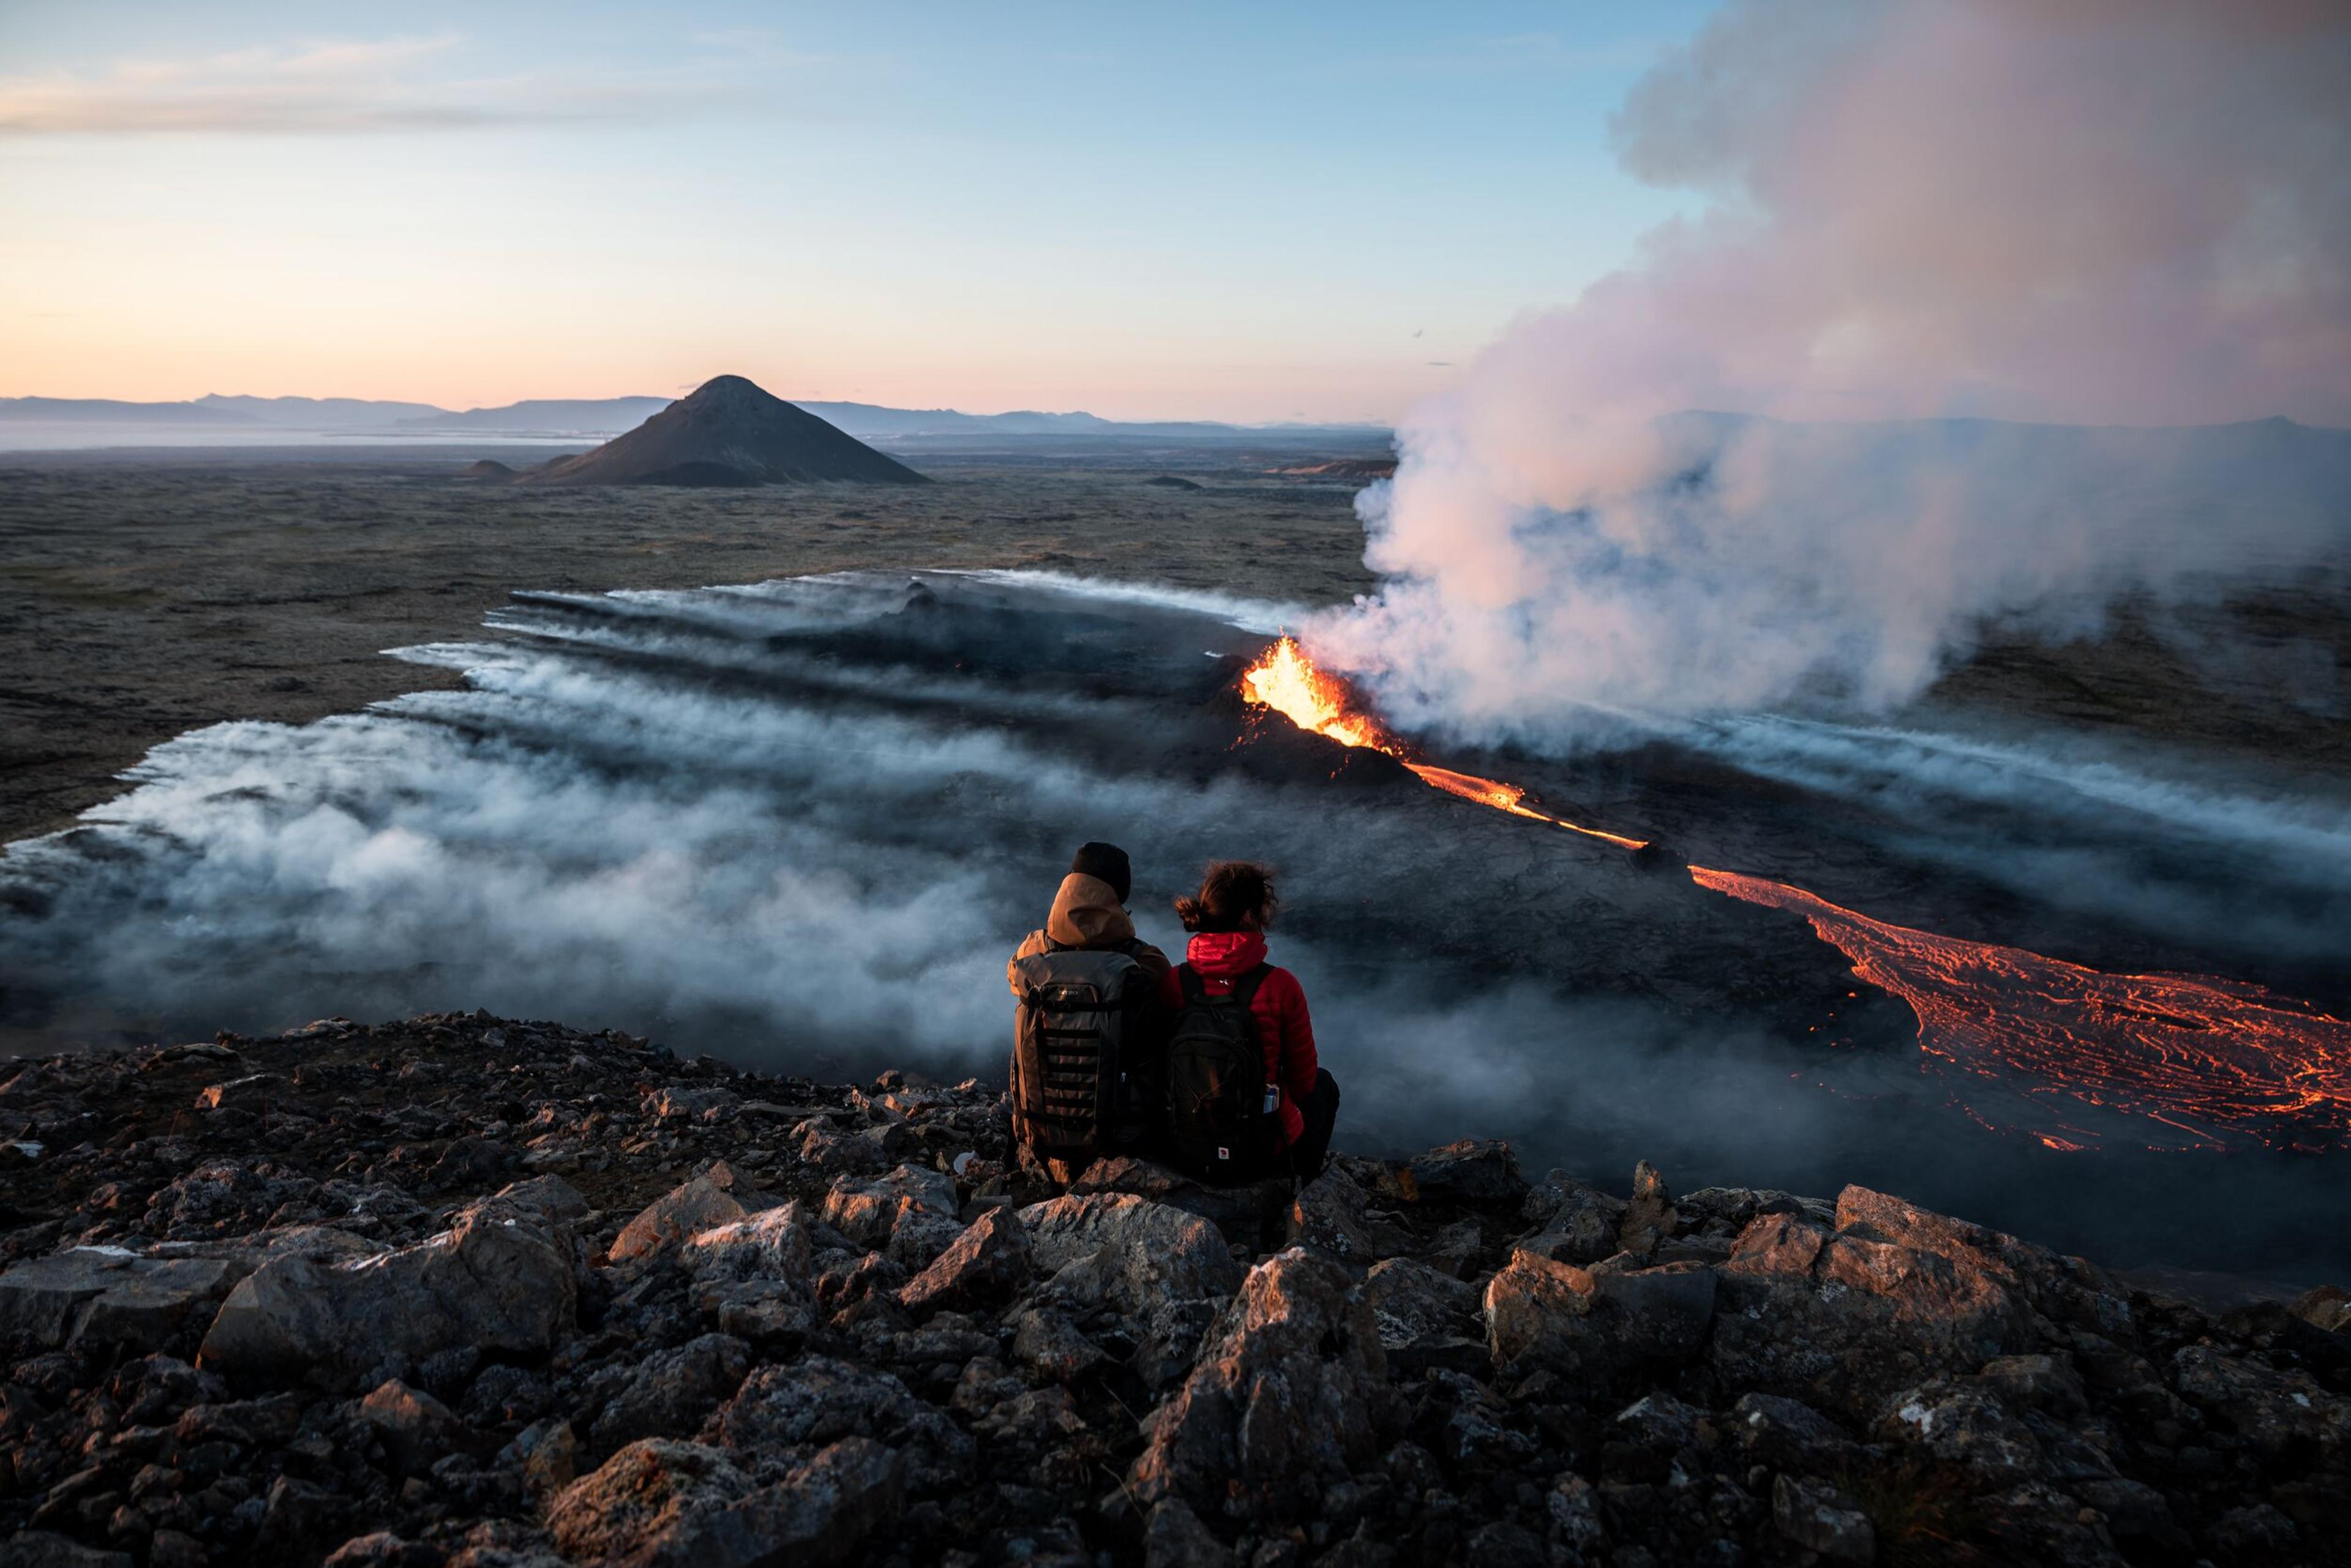 "Two people observing a dramatic volcanic eruption in Iceland, with lava flows and smoke.